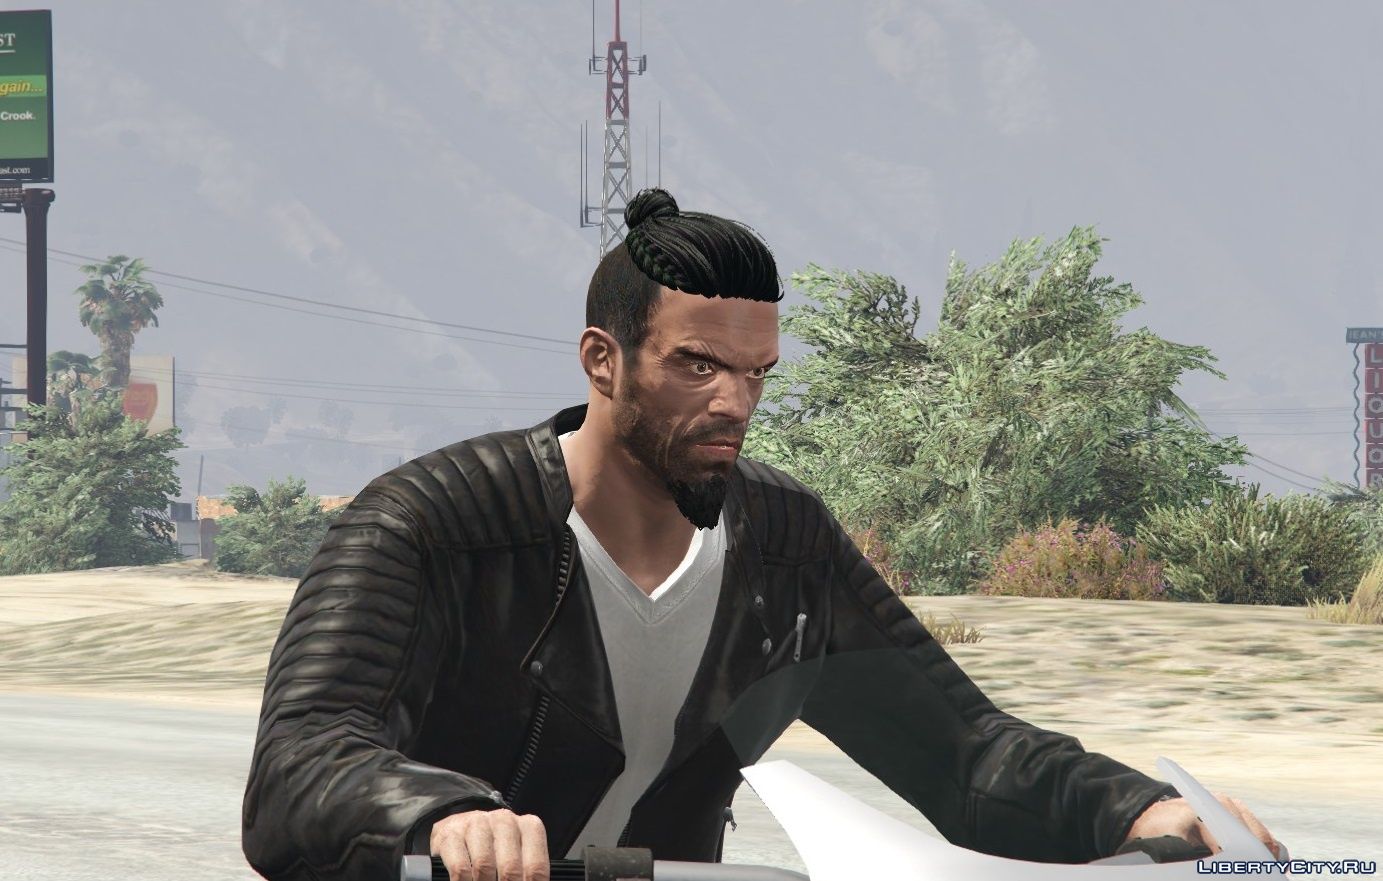 How to install New Hairstyles for MichaelTrevor  Franklin in GTA 5   Modio Thread  YouTube